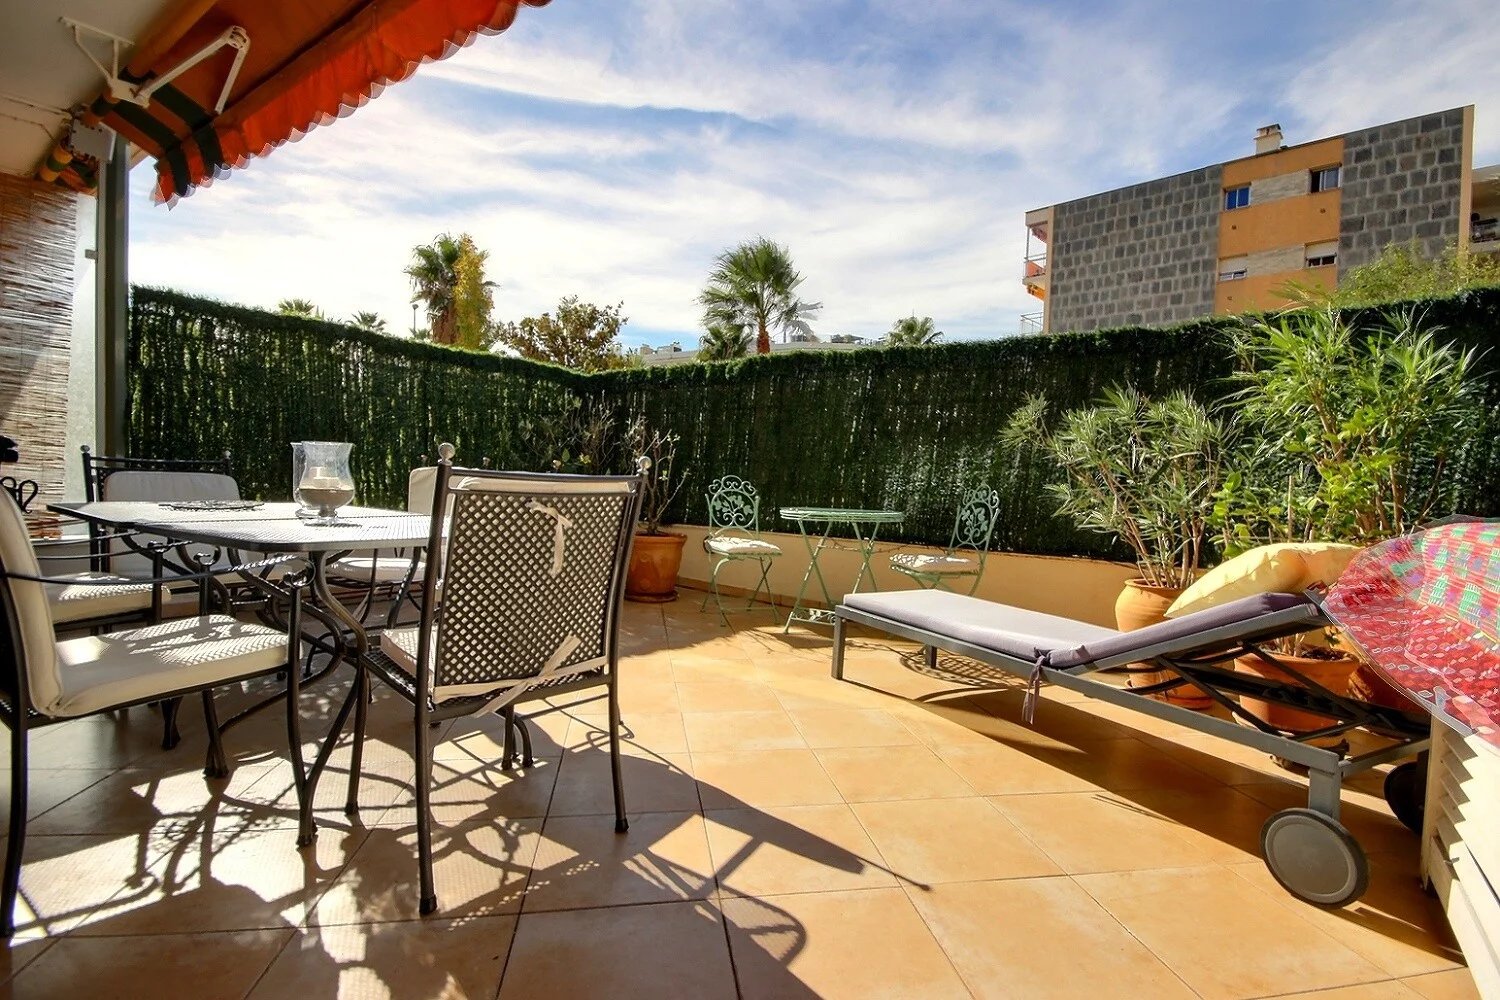 Property for sale in Cannes Basse Californie